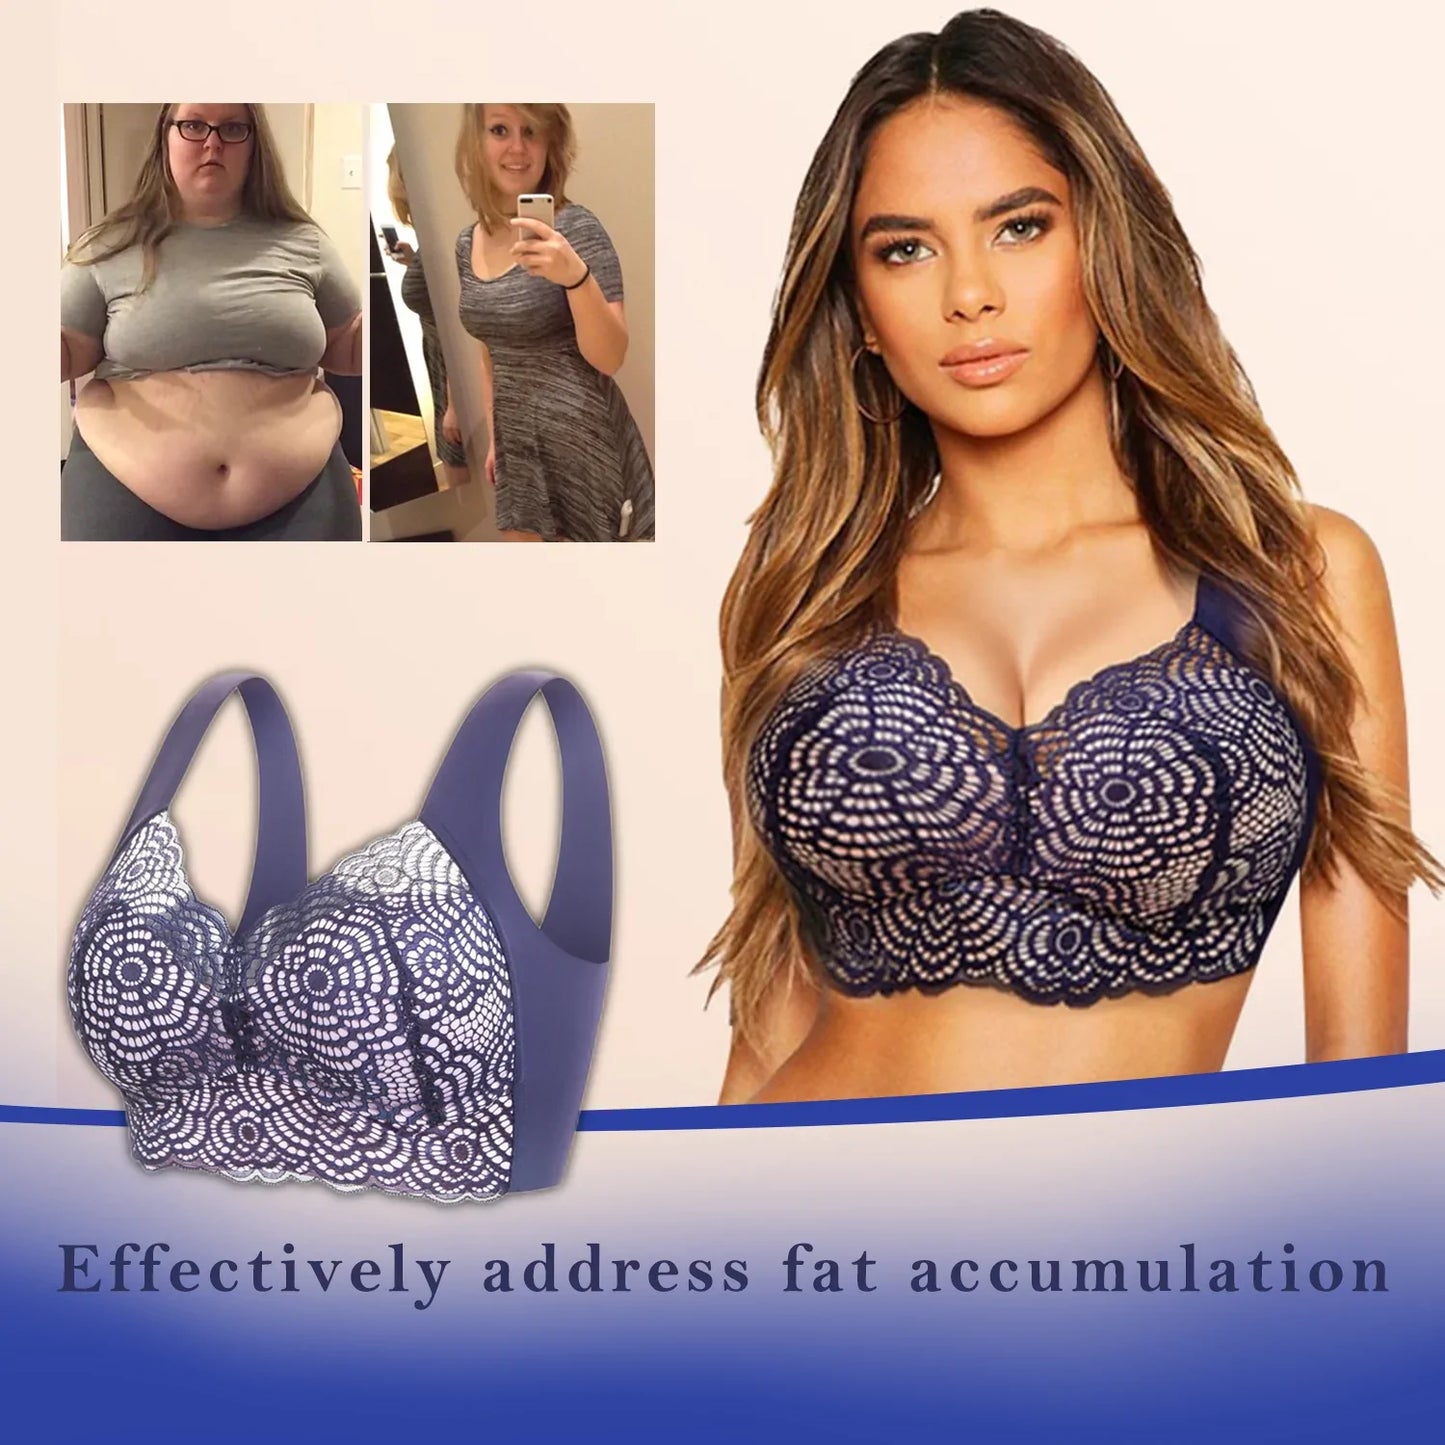 LuxuryTrends® - Detoxification and Shaping & Powerful Lifting Bra